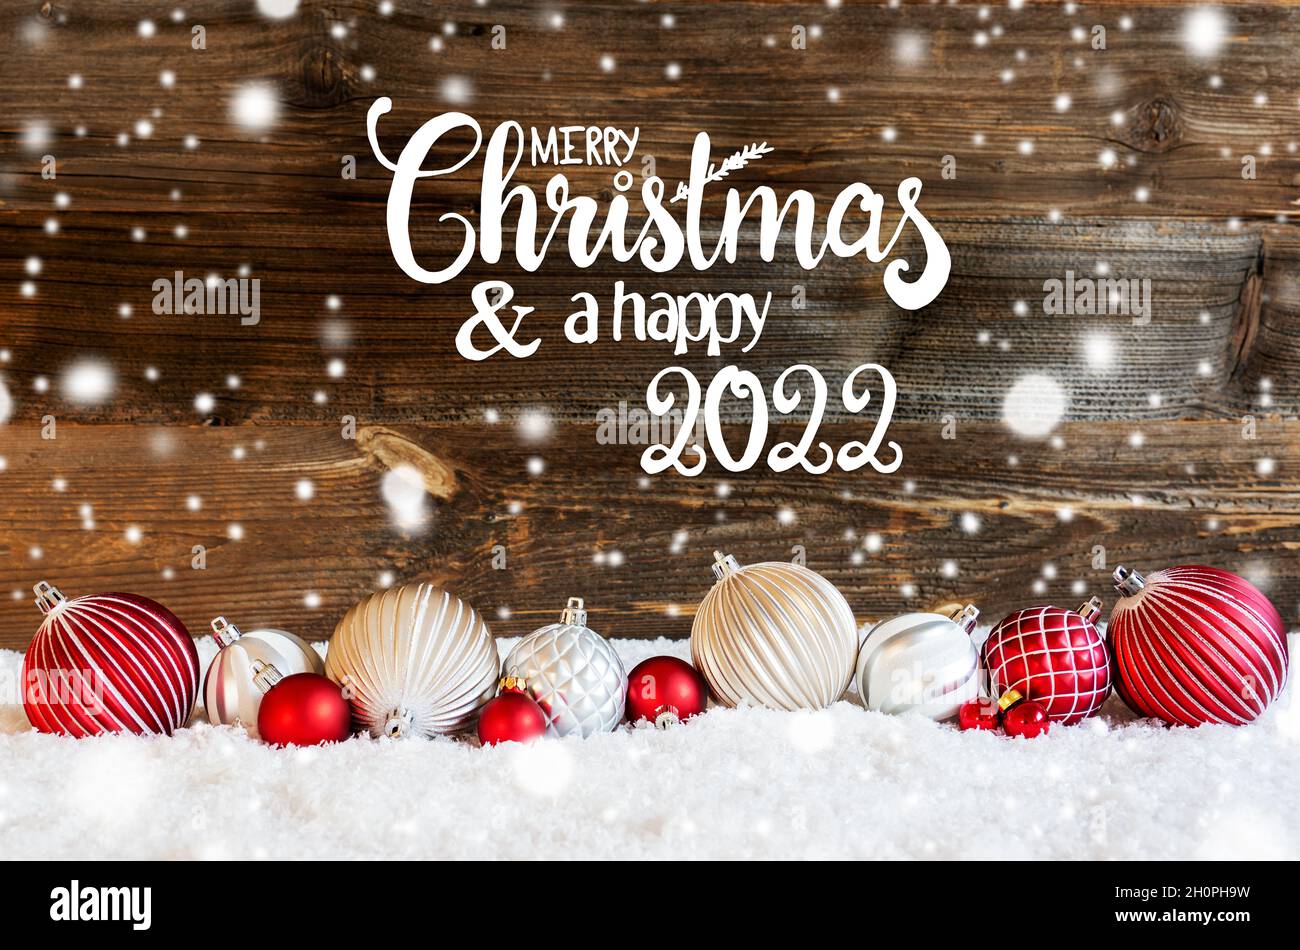 Christmas Ball Ornament, Snow, Merry Christmas And A Happy 2022, Snowflakes Stock Photo